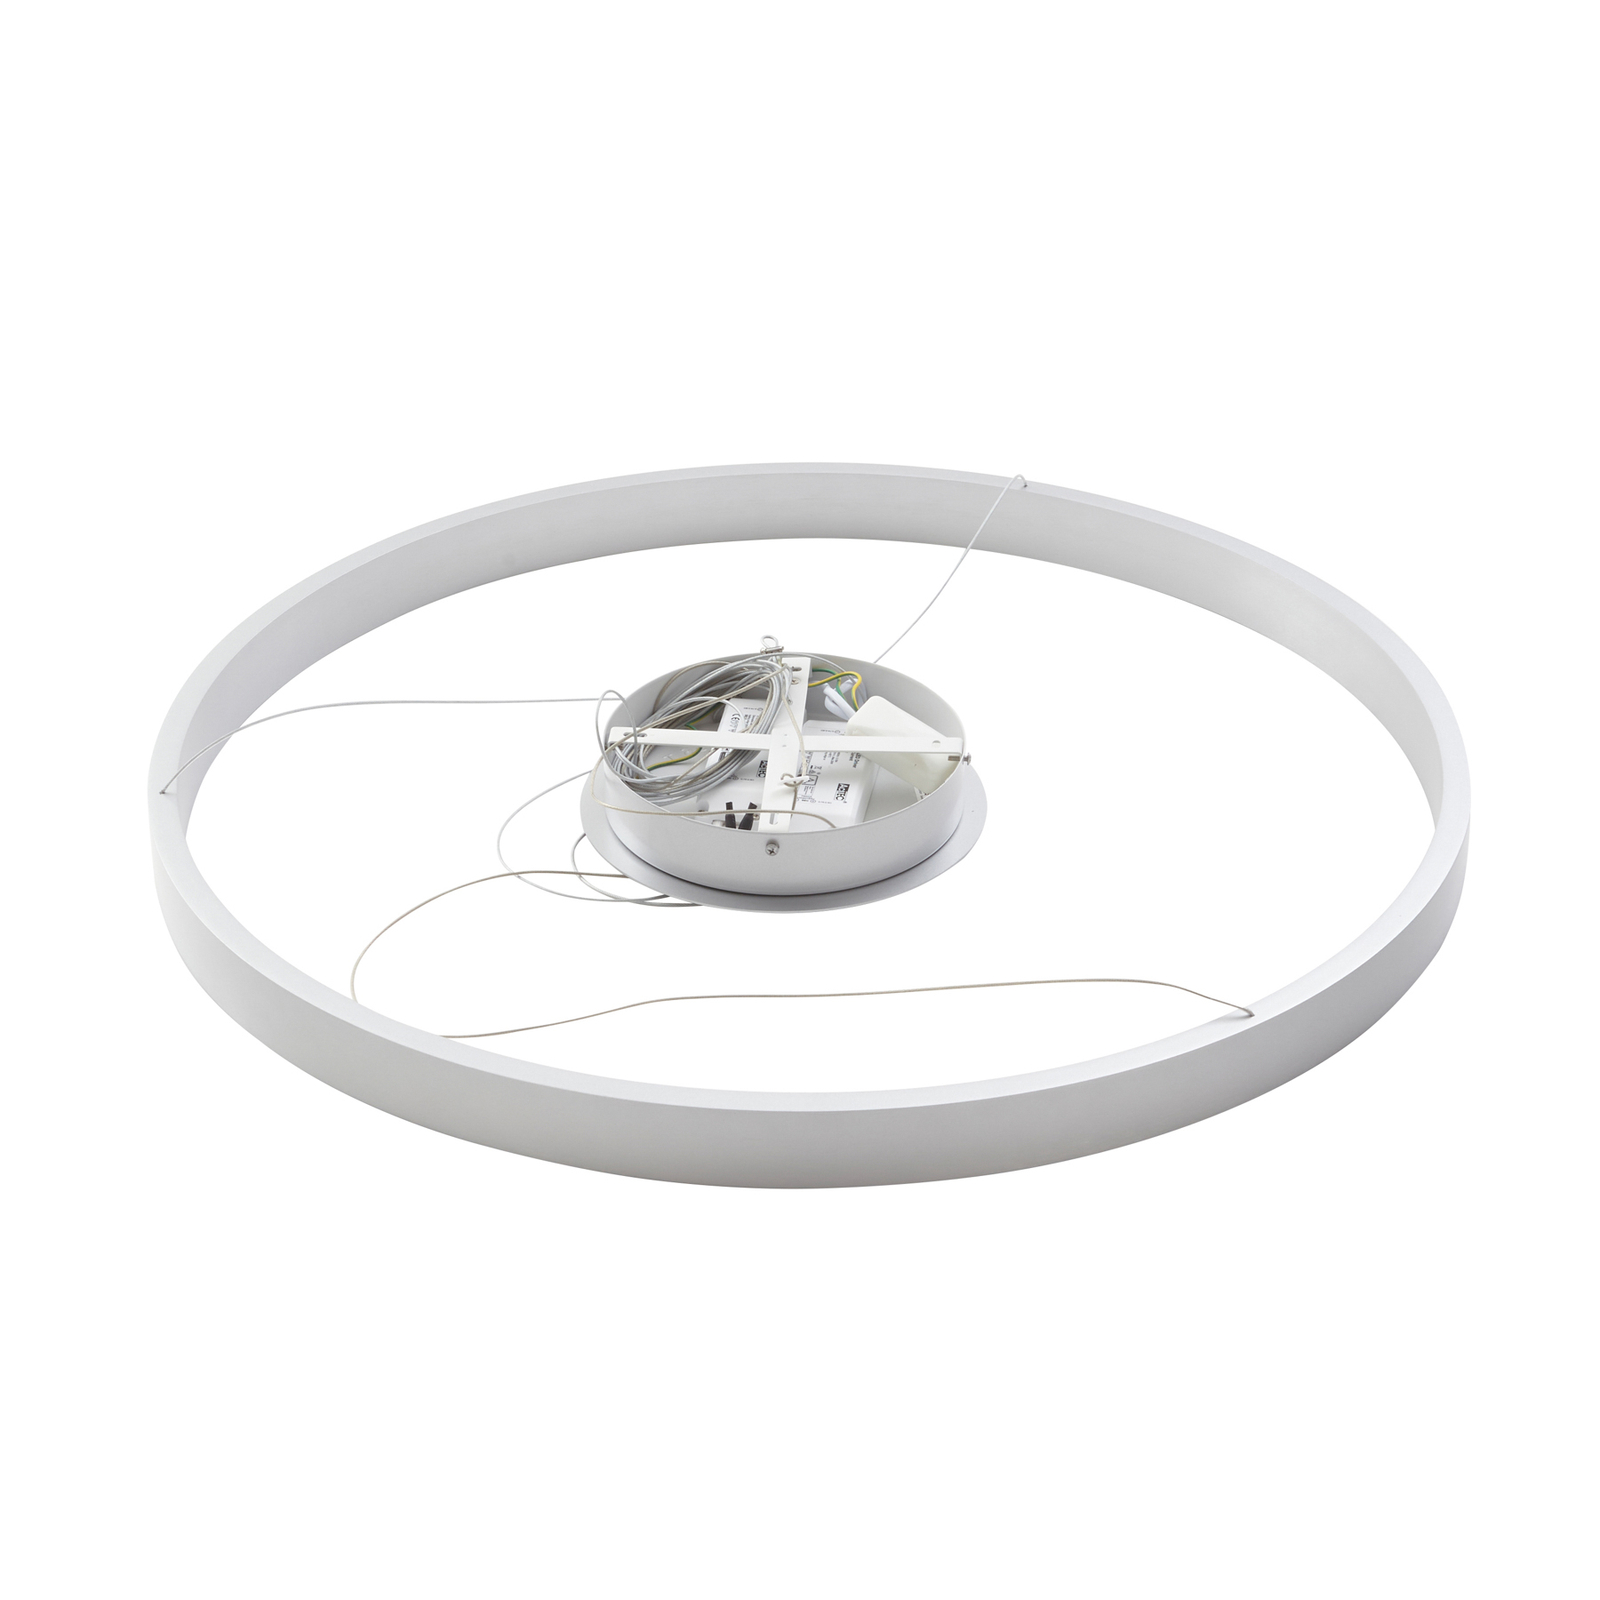 Arcchio Answin LED hanglamp 52,8 W zilver